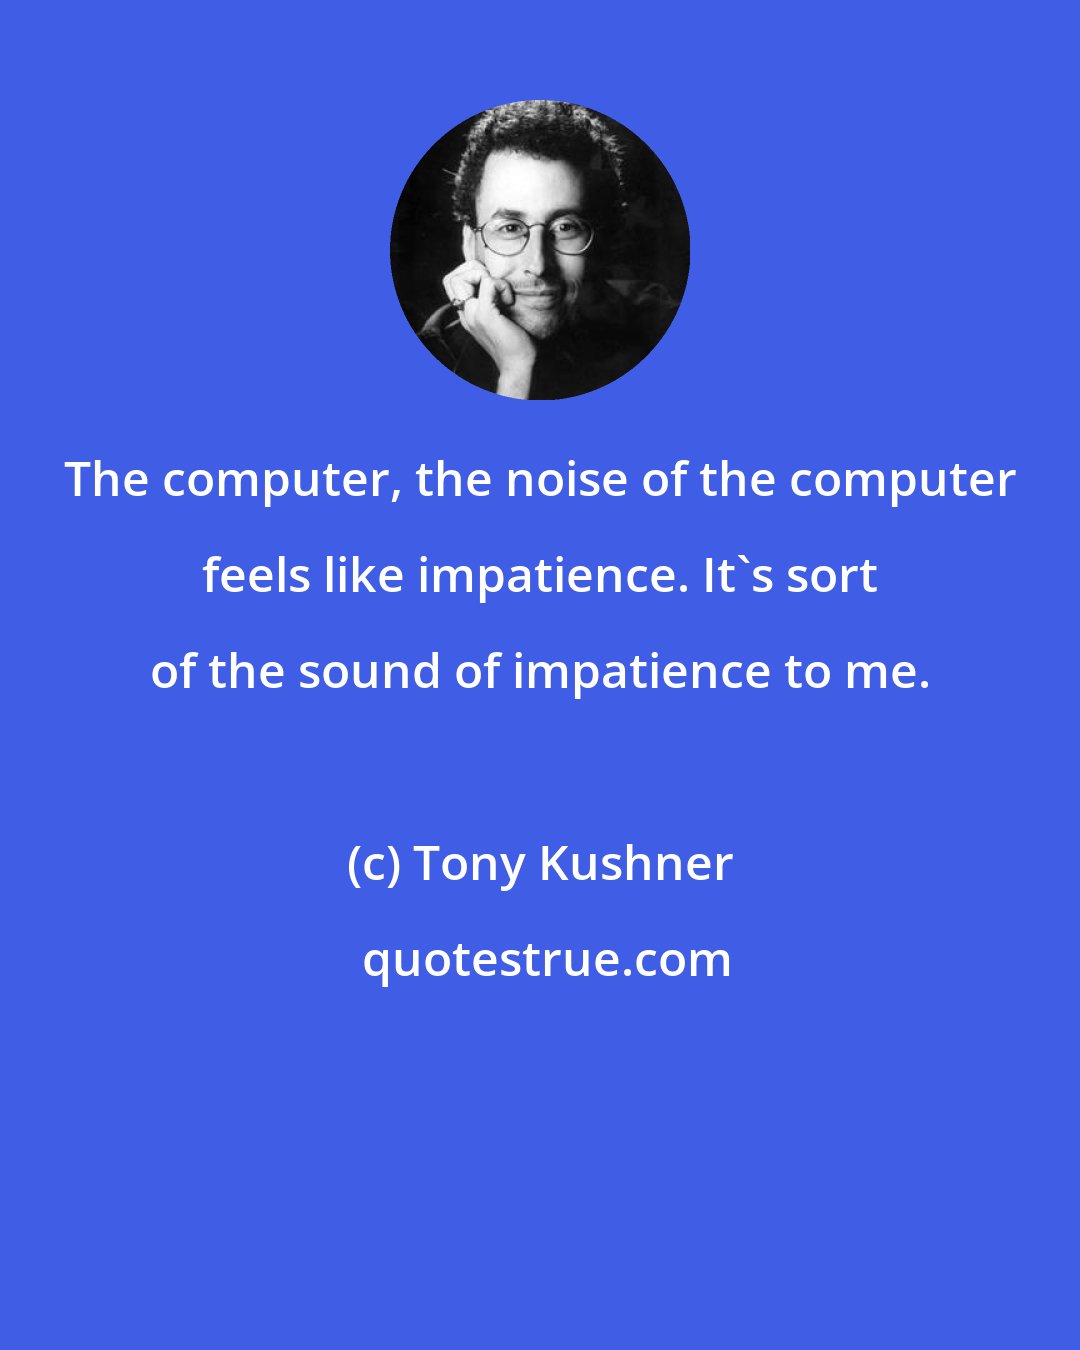 Tony Kushner: The computer, the noise of the computer feels like impatience. It's sort of the sound of impatience to me.